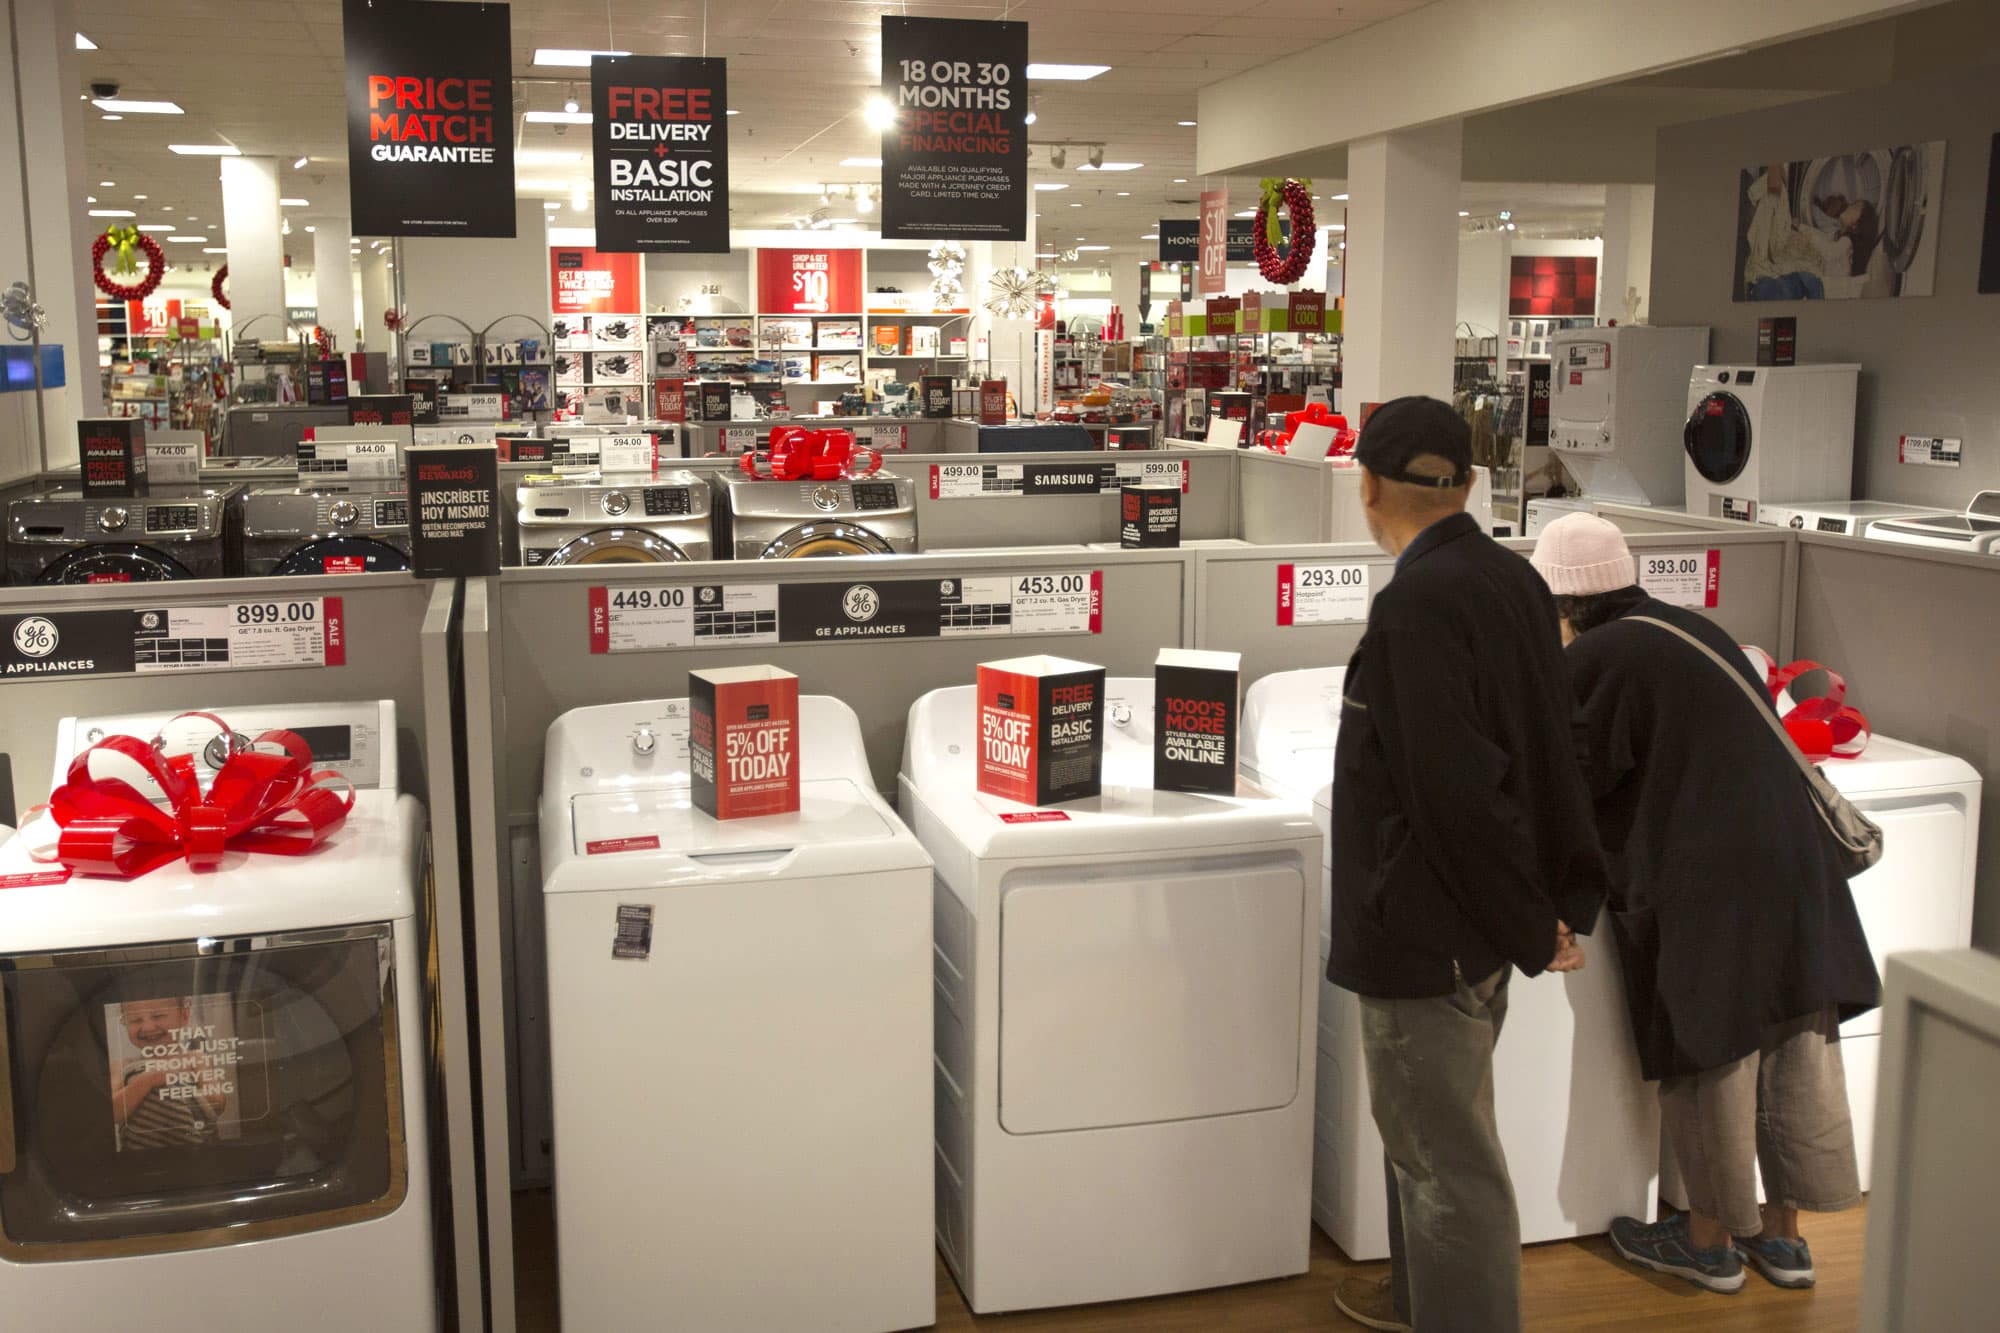 jcpenney dishwashers on sale